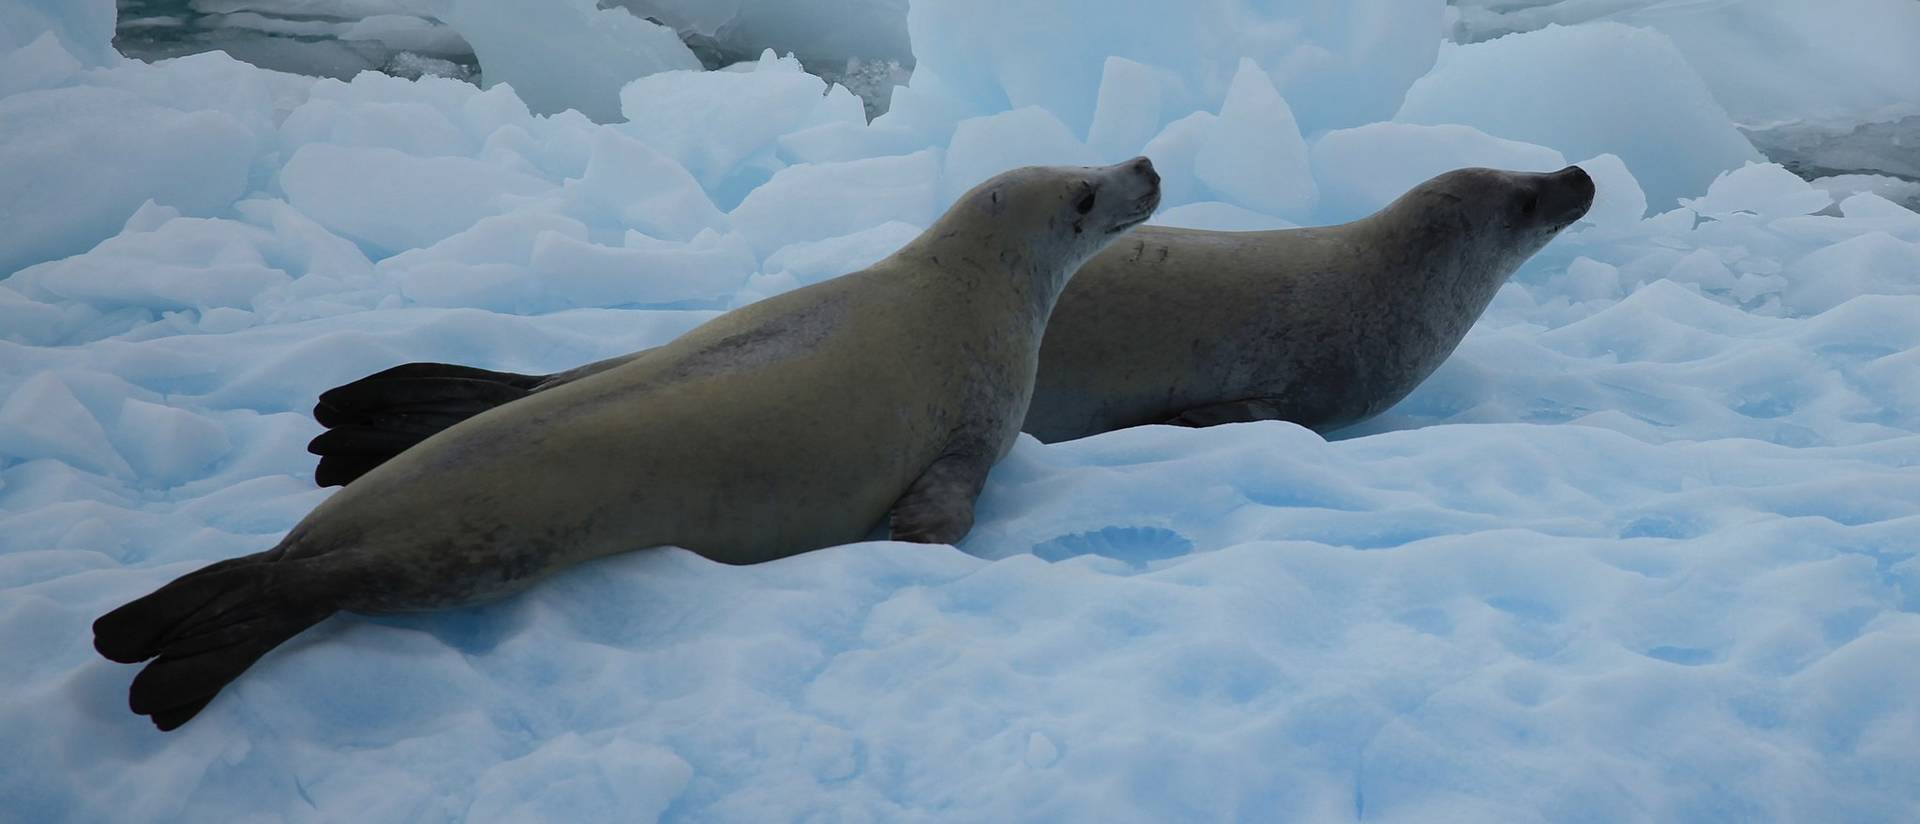 Crabeater seals in the Lemaire Channel, Antarctica. Photo credit: Liam Quinn, Canada